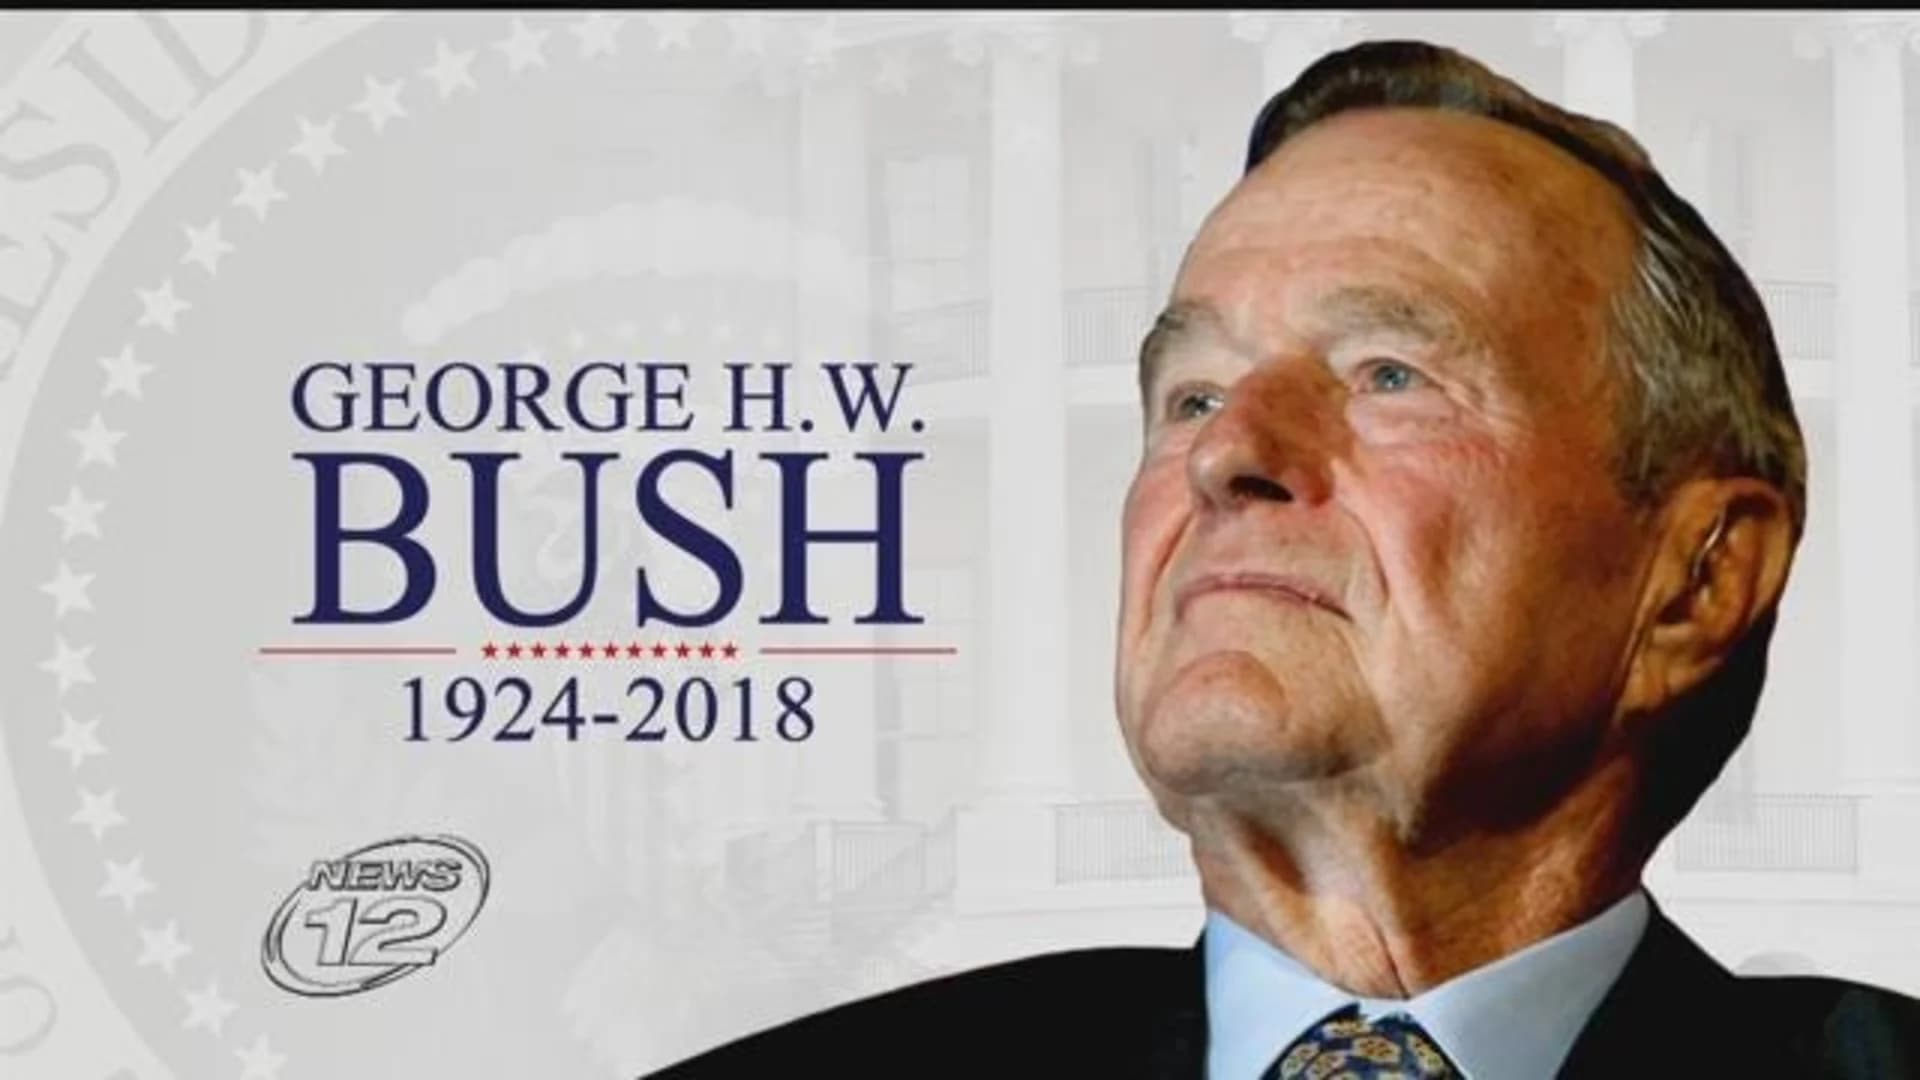 Nation bids goodbye to George HW Bush with high praise, cannons, humor